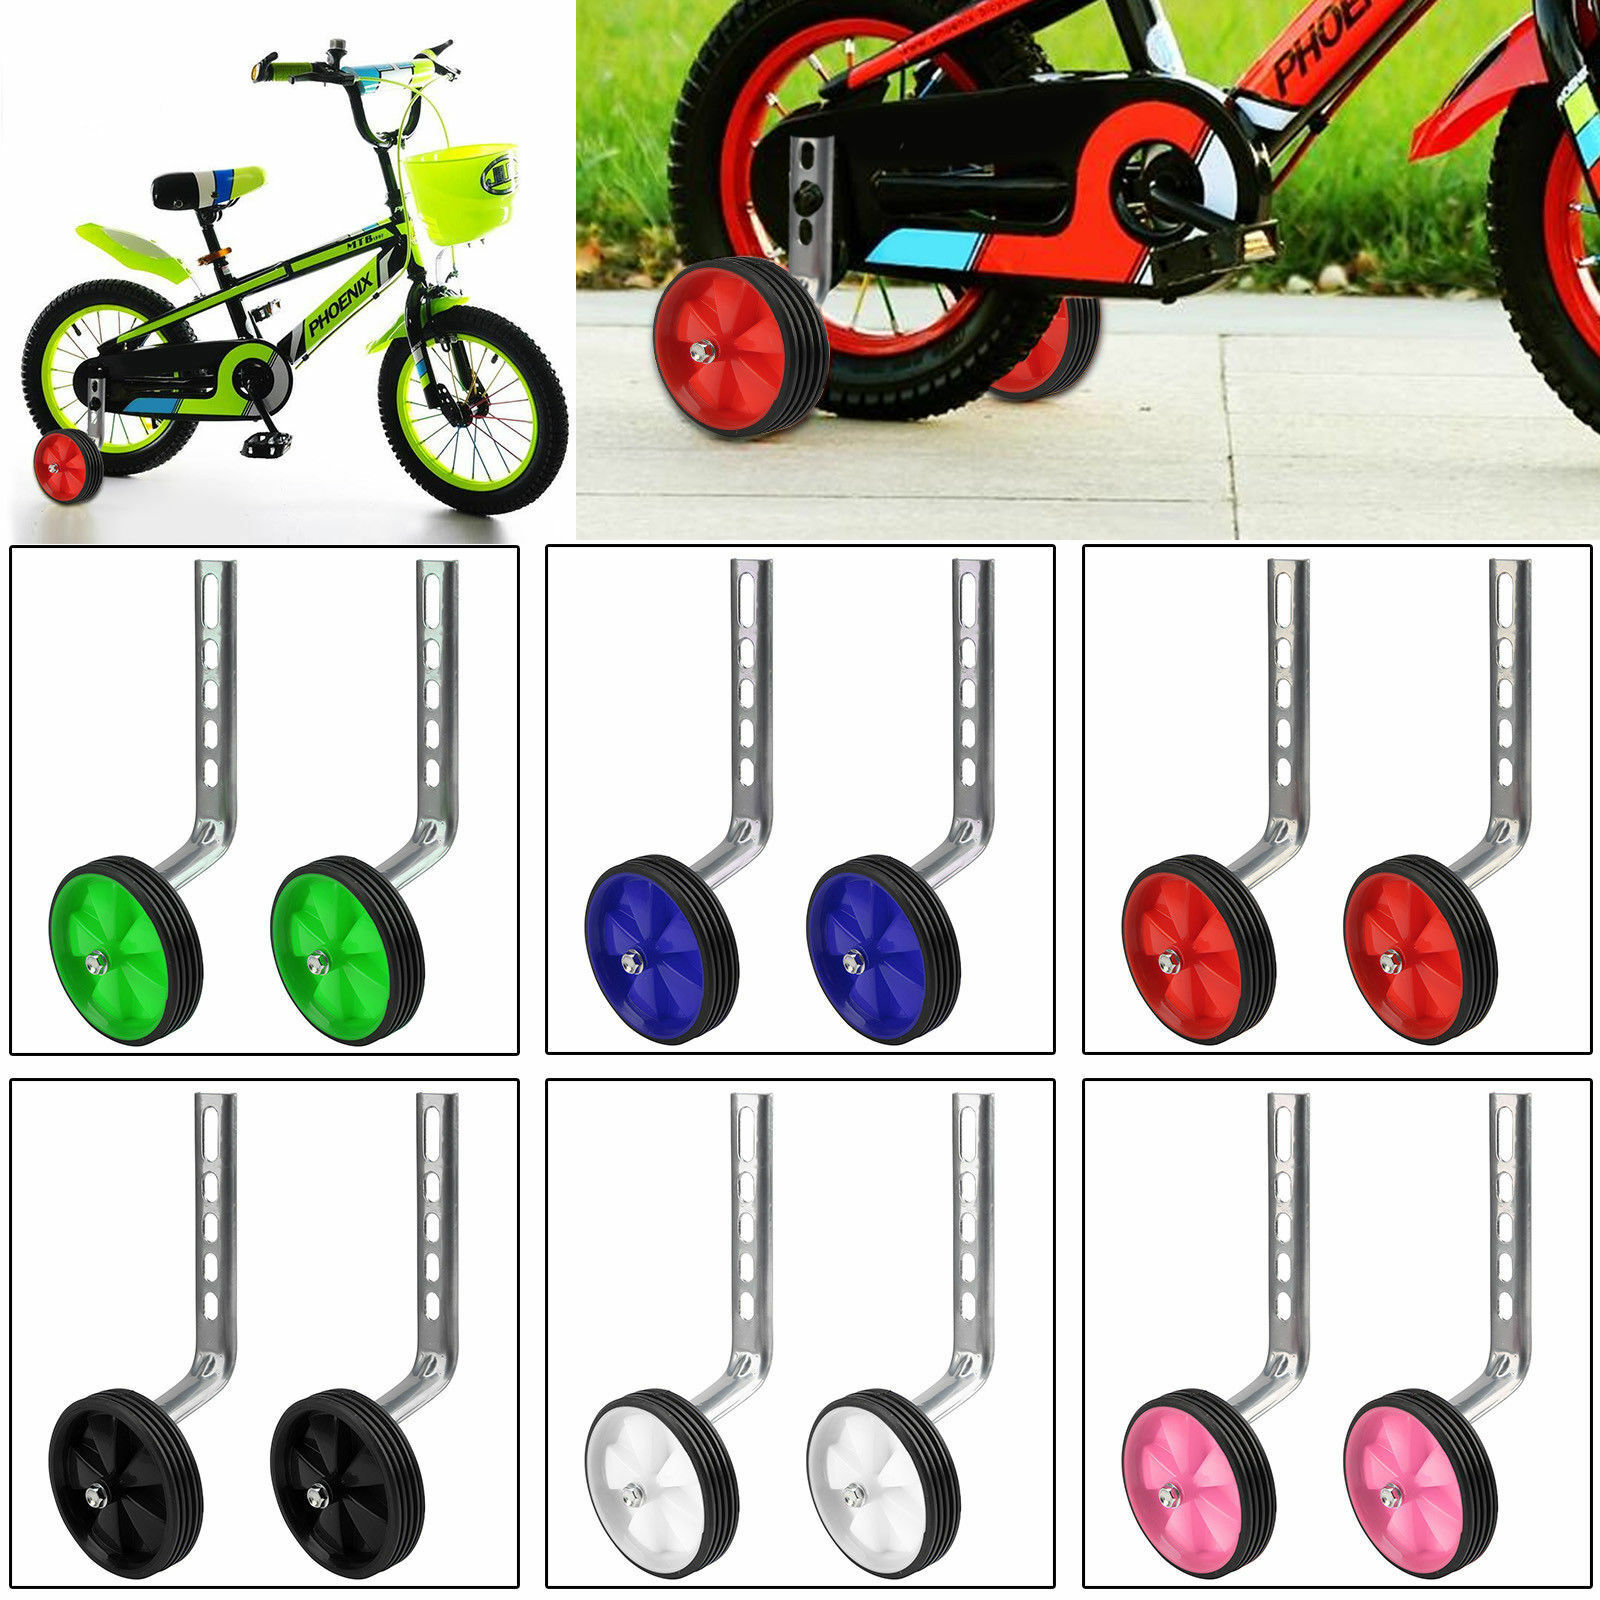 Adjustable Variable Speed Bicycle Training Wheels for Adult and Kids16